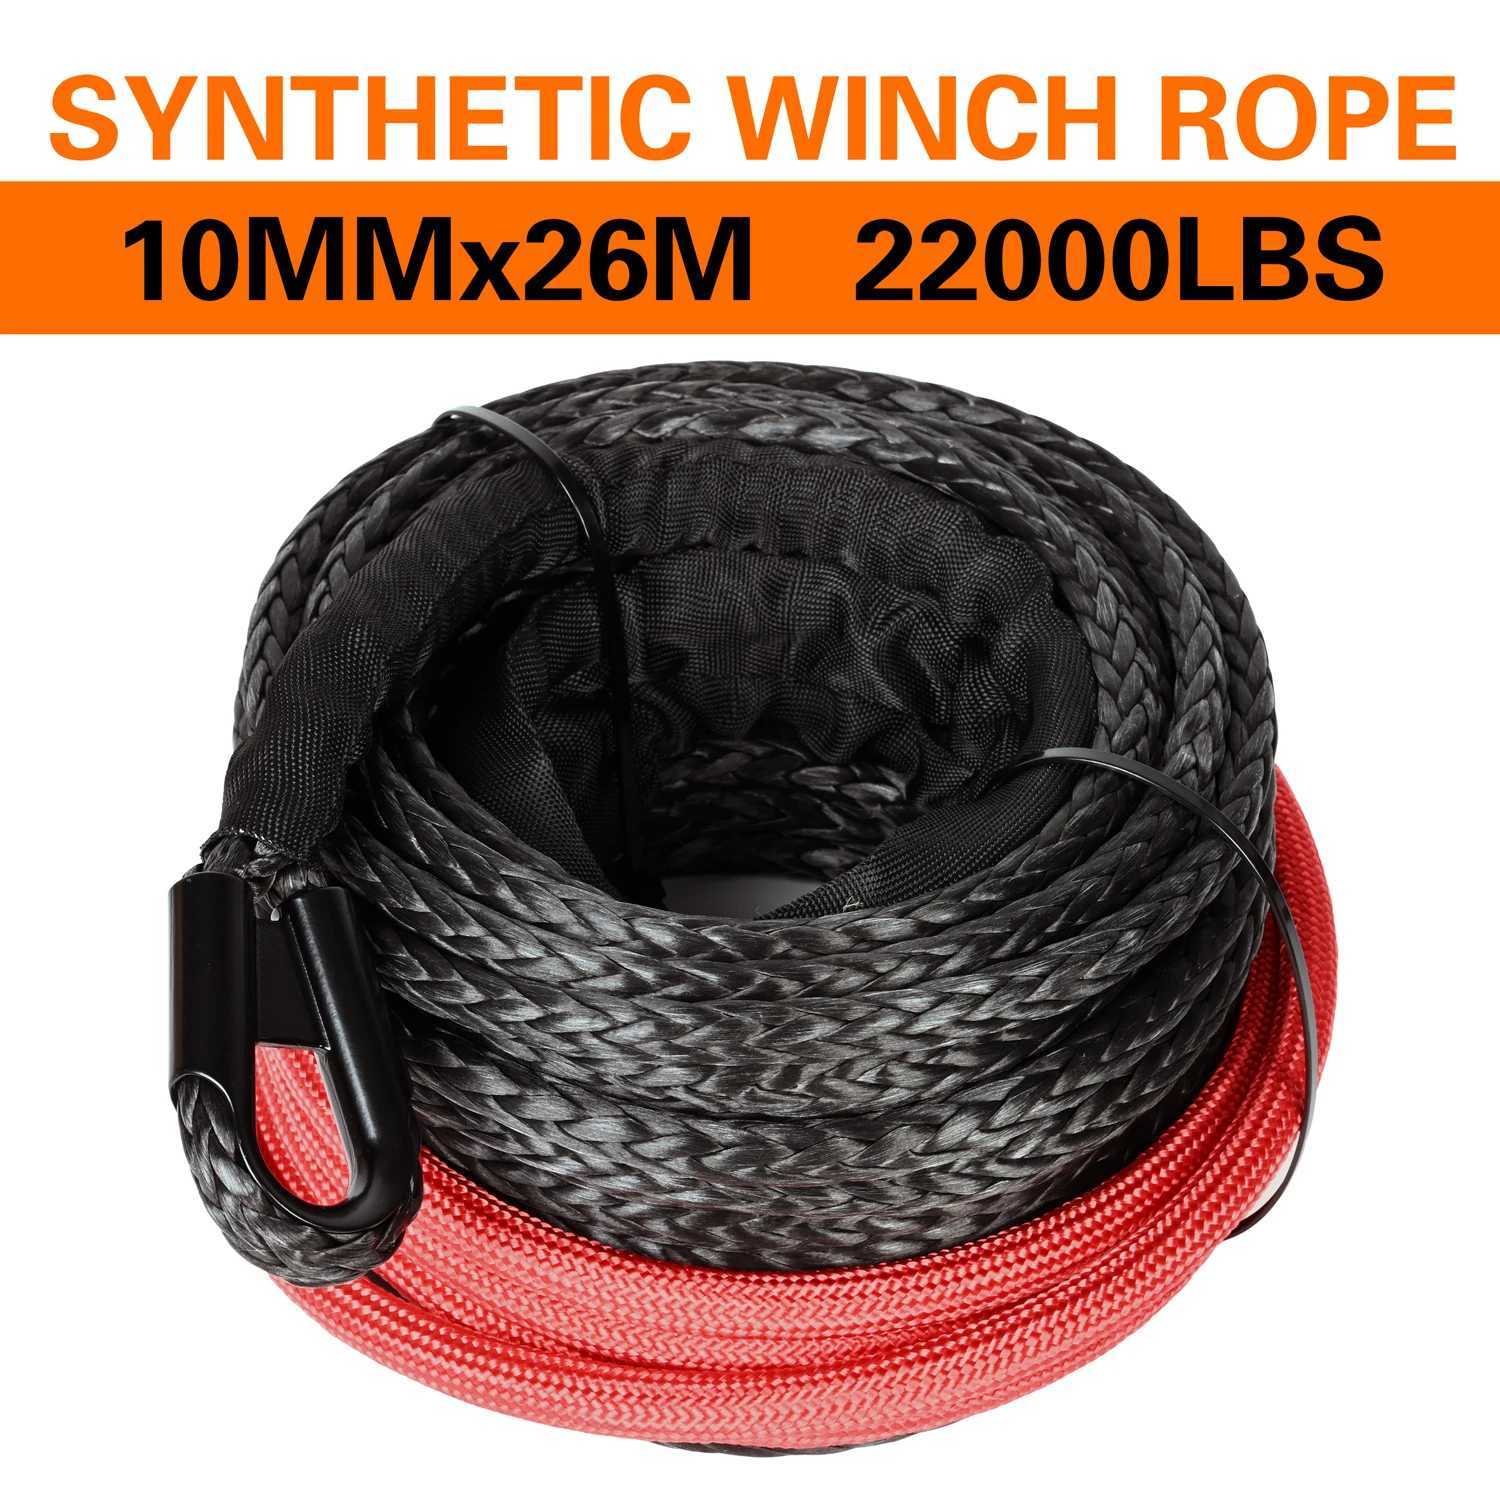 Jump Ropes Boshili 10mm x 26m 22000 pound synthetic winch rope cable with black protective sleeve suitable for ATV UTV SUV black Y240423